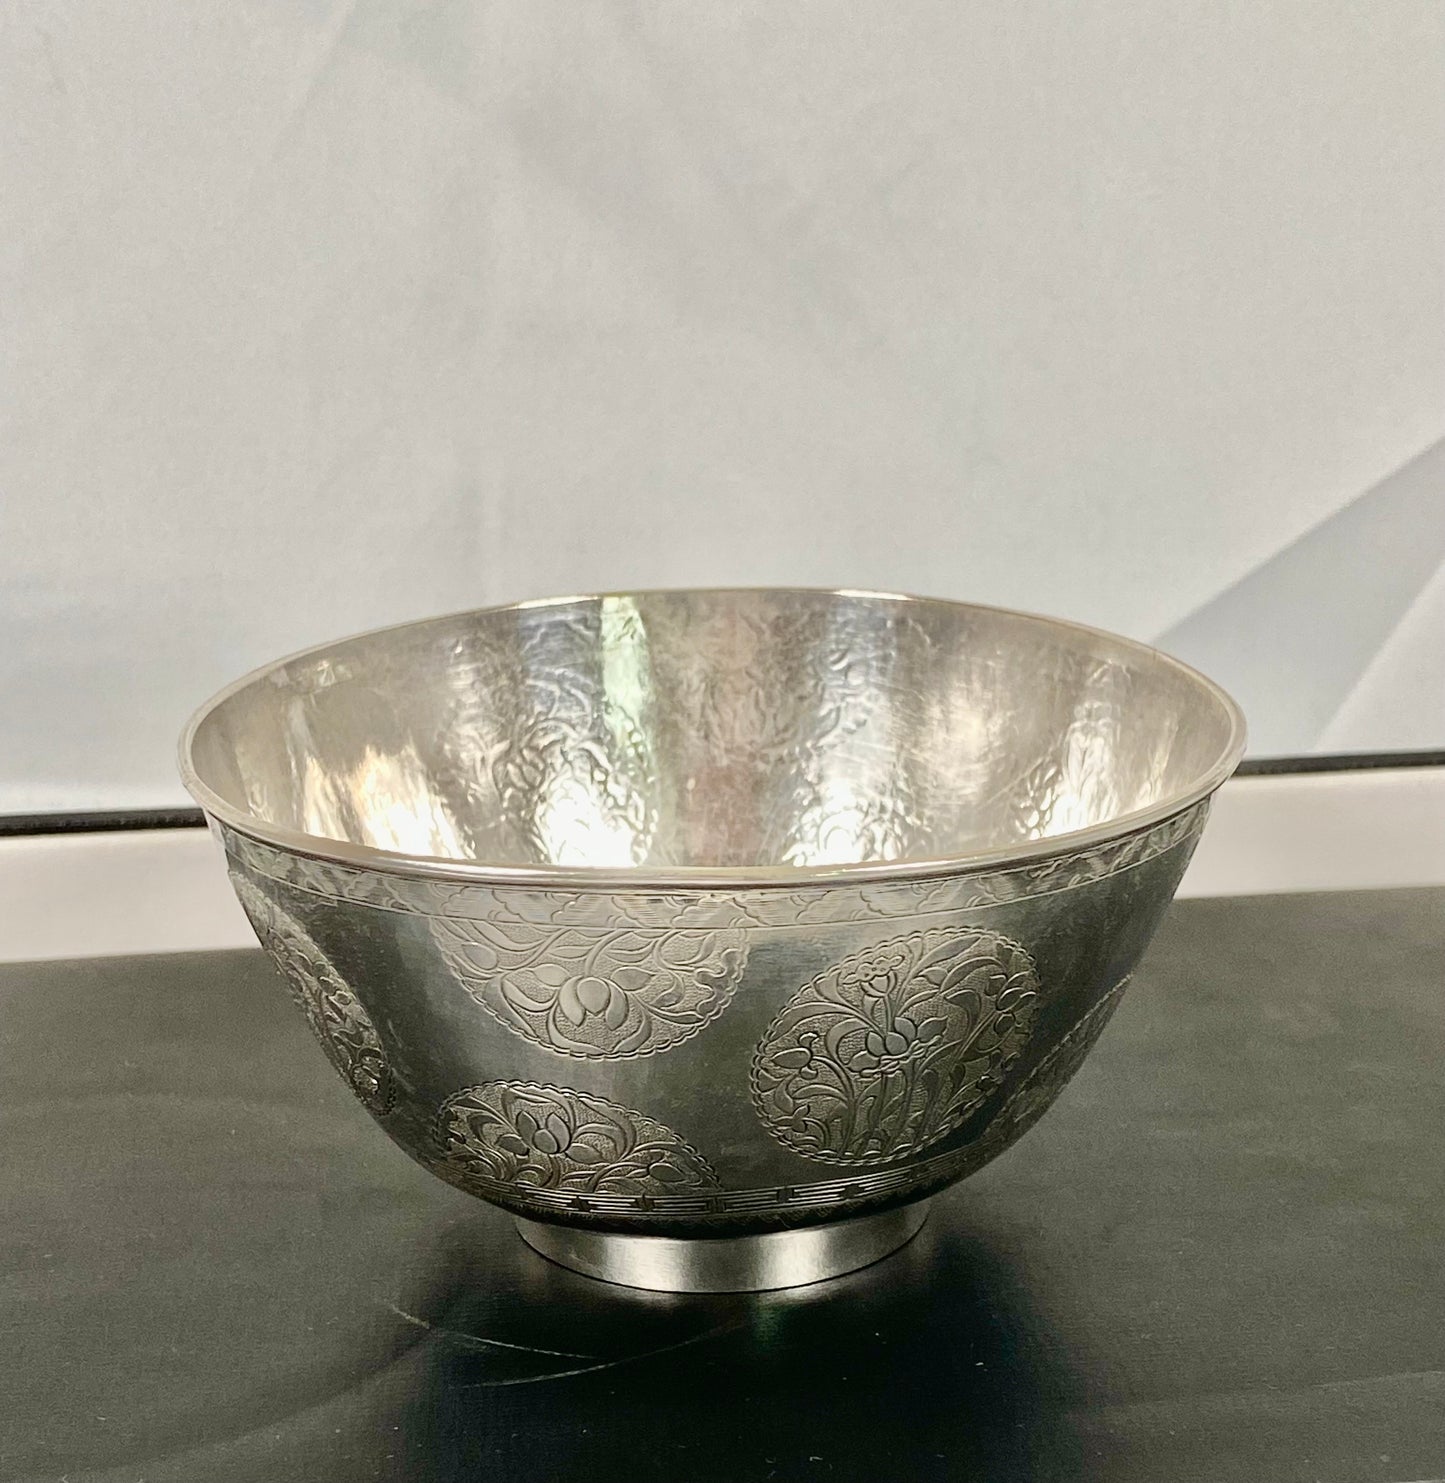 20th century Chinese export silver bowl